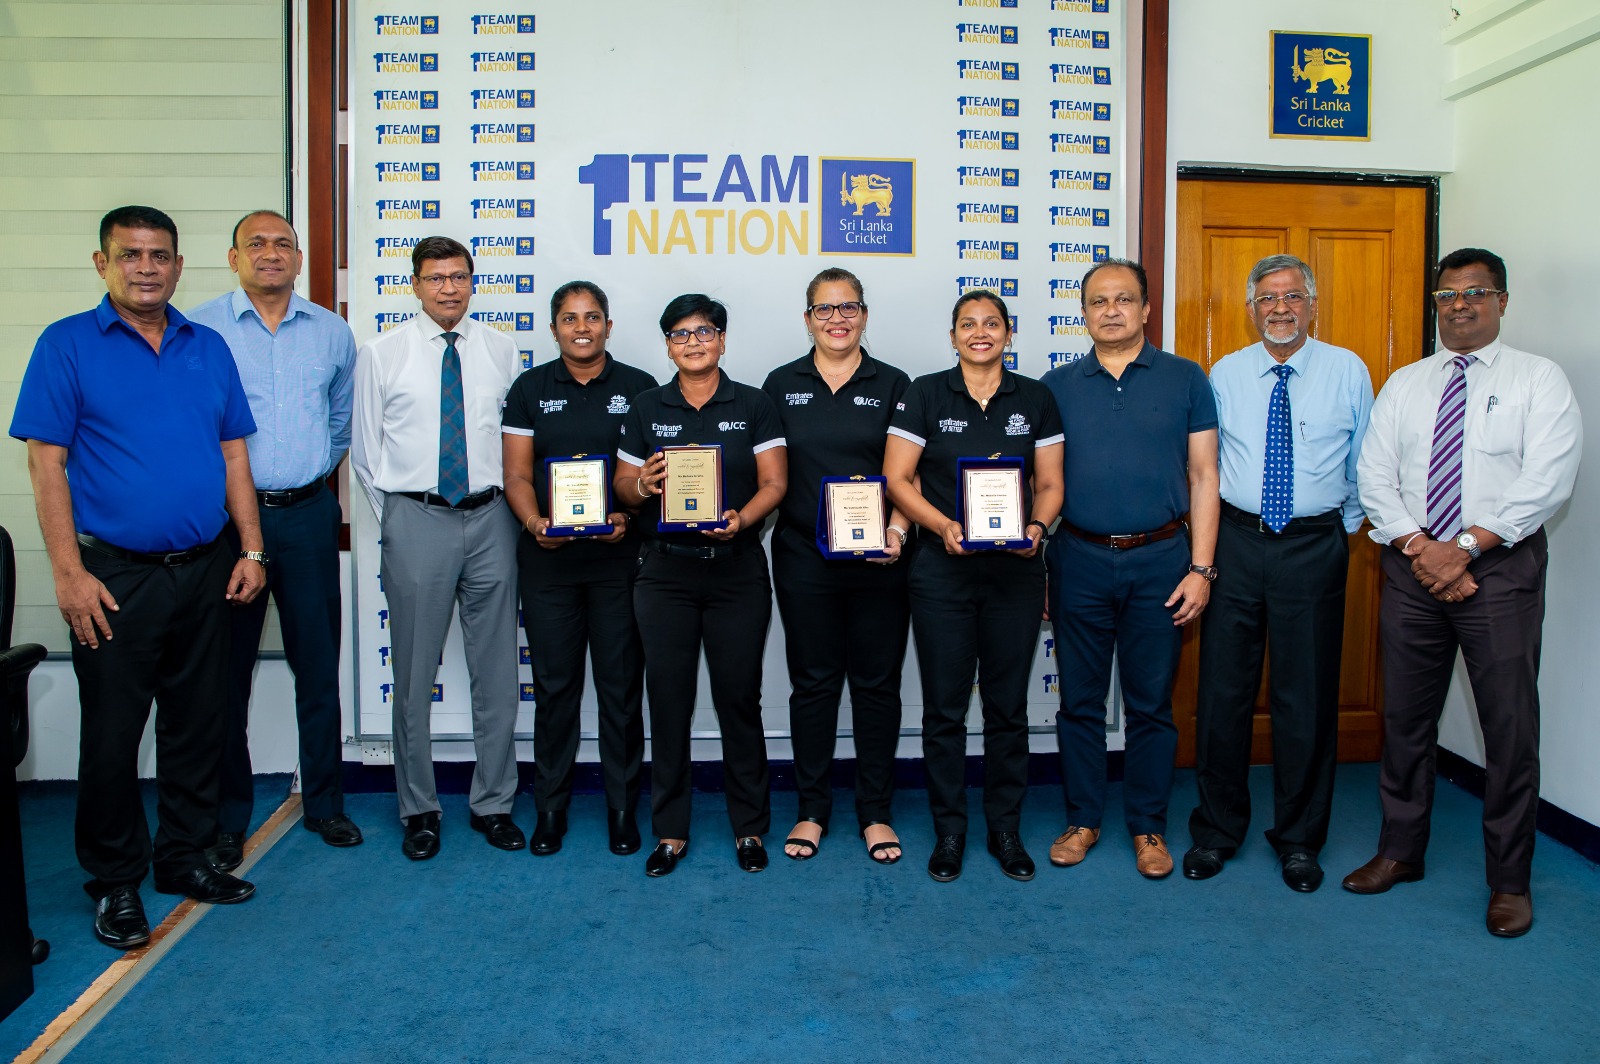 SLC felicitated the four Sri Lankan female match officials on the ICC panels